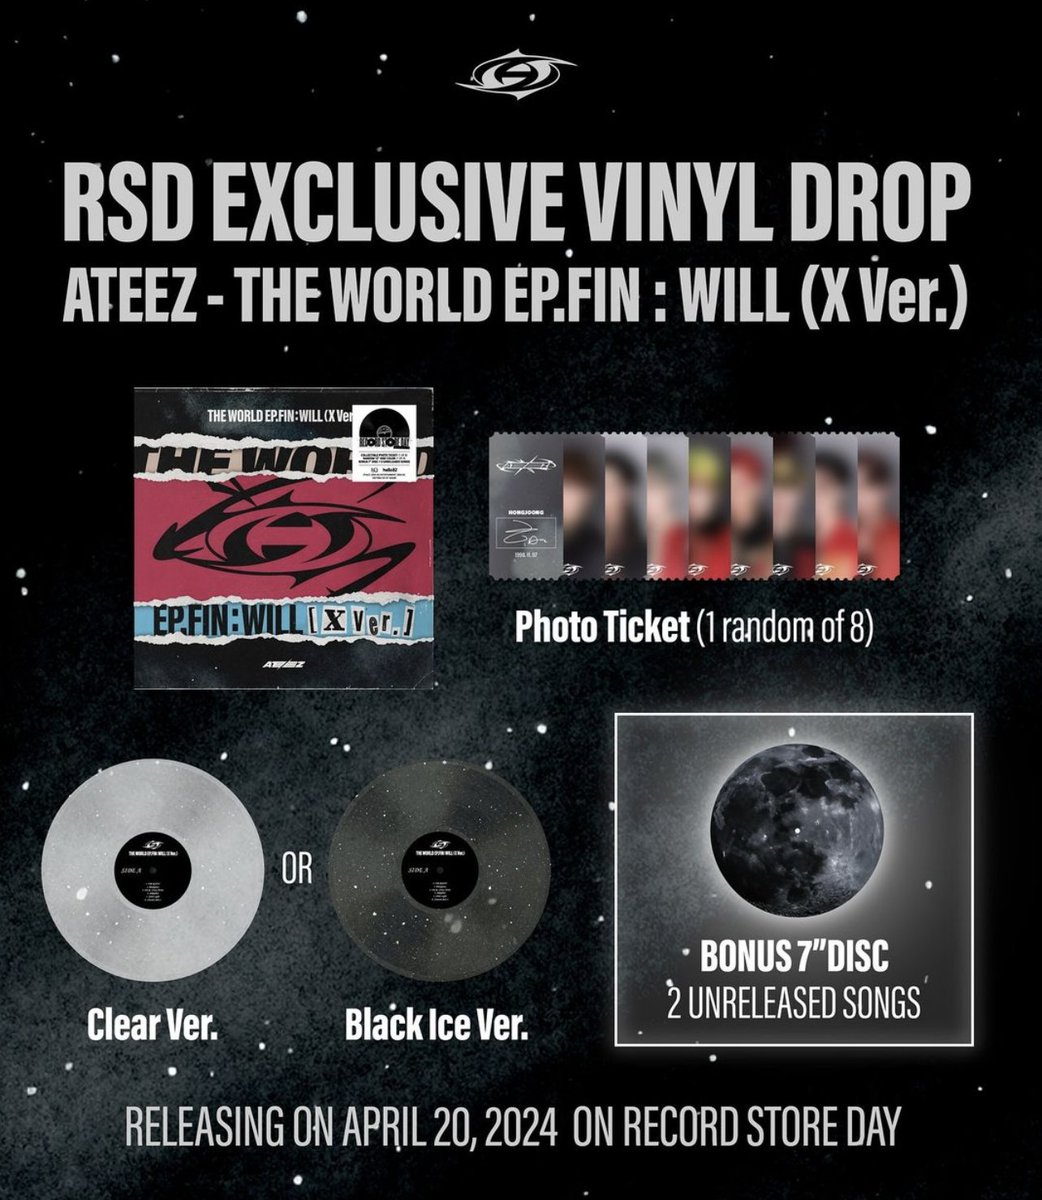 ✨RSD Exclusive ATEEZ Vinyl April 20
THE WORLD EP.FIN : WILL (X Ver.) 

☑️TWO unreleased songs (bonus vinyl) 
☑️Photo Ticket (1 random out of 8) 
☑️Clear Ver. OR Black Ice Ver. (1 random out of 2) 
☑️ 3 Postcards 
☑️1 Poster

#ATEEZRSD #RSD_KpopArtistOfTheYear_ATEEZ #RSD24